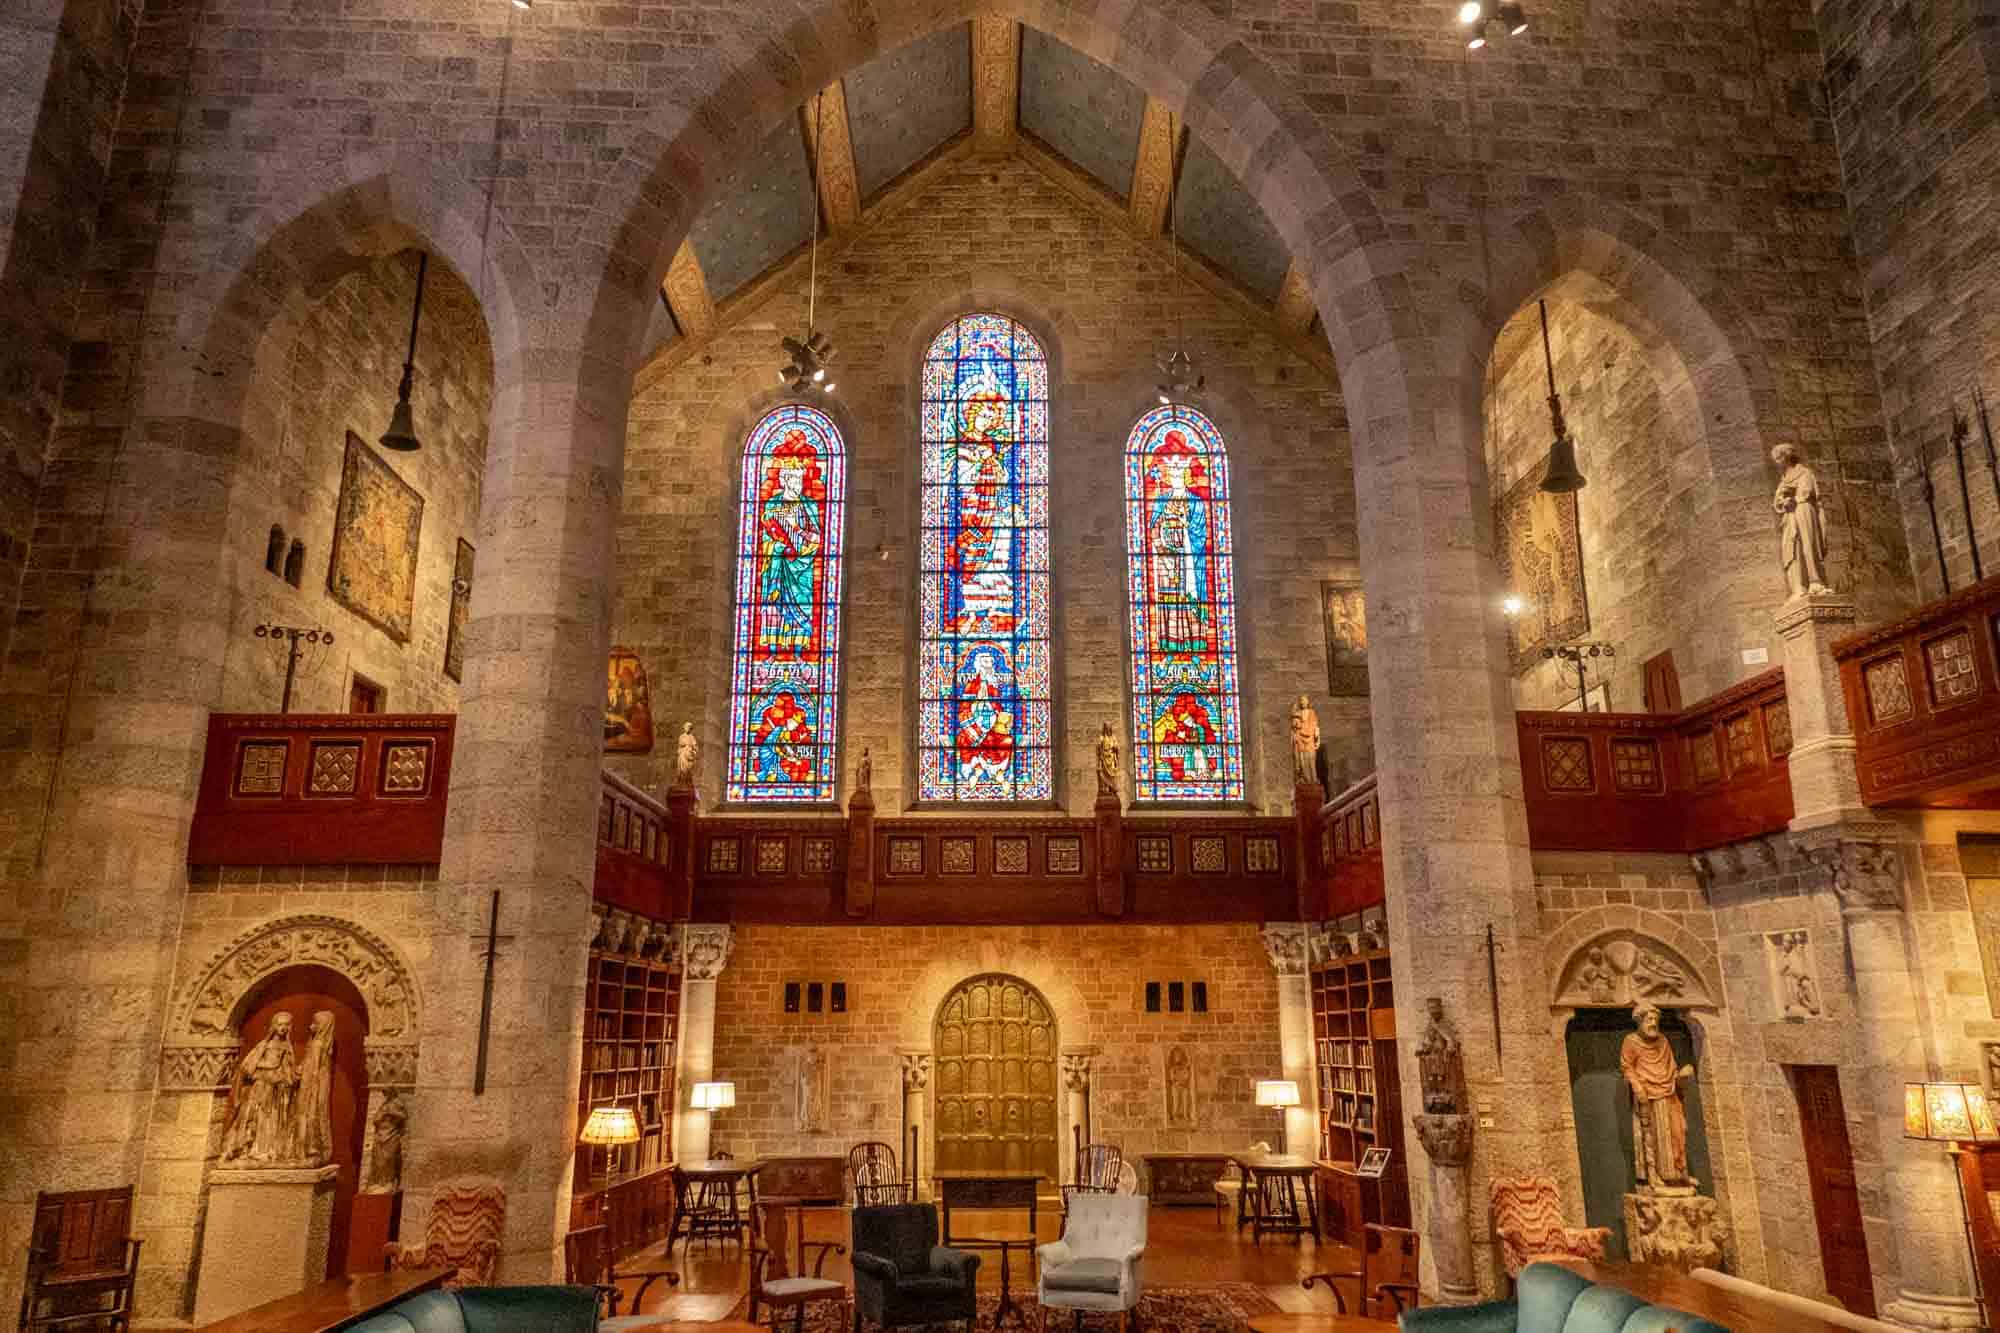 Stone room with vaulted ceiling and arches, stained glass windows, and sculptures